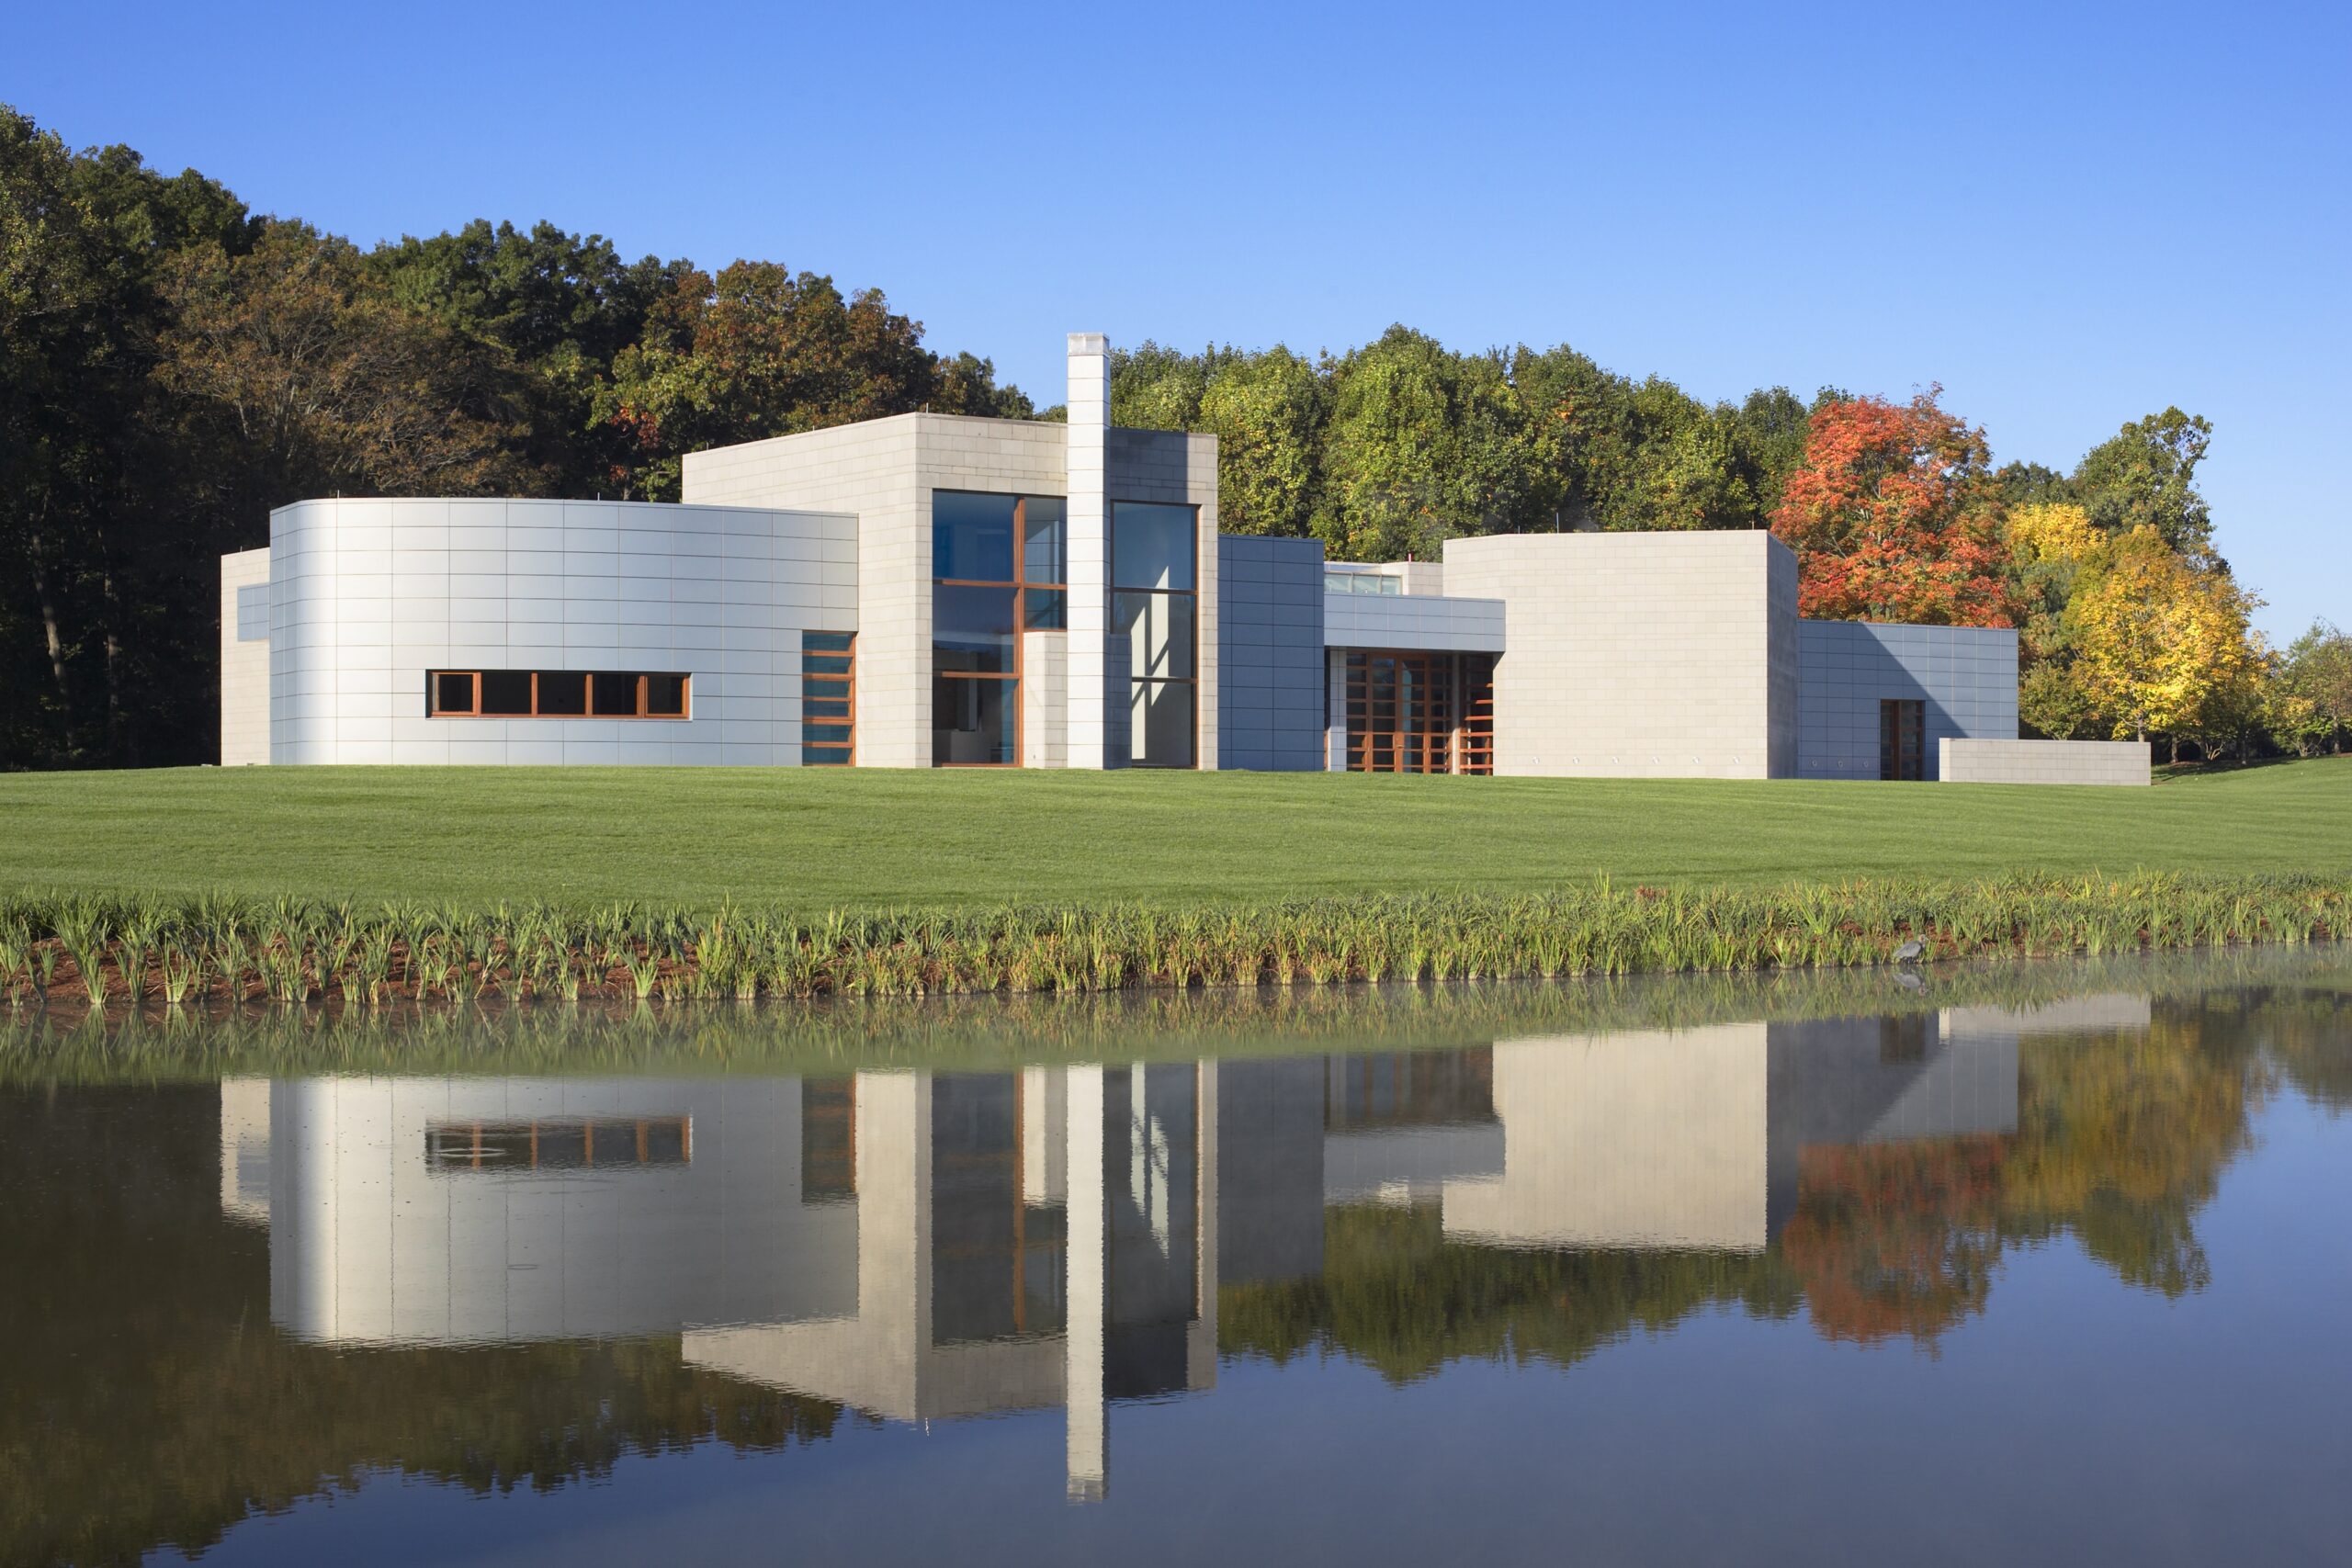 Opened in 2006, the Gallery is Glenstone’s first museum building. The Gallery hosts changing exhibitions in generously proportioned spaces and opens up to a terrace overlooking a pond. A limited palette of materials—zinc, granite, stainless steel, and teak—allows the architecture to exist in harmony with the surrounding landscape.